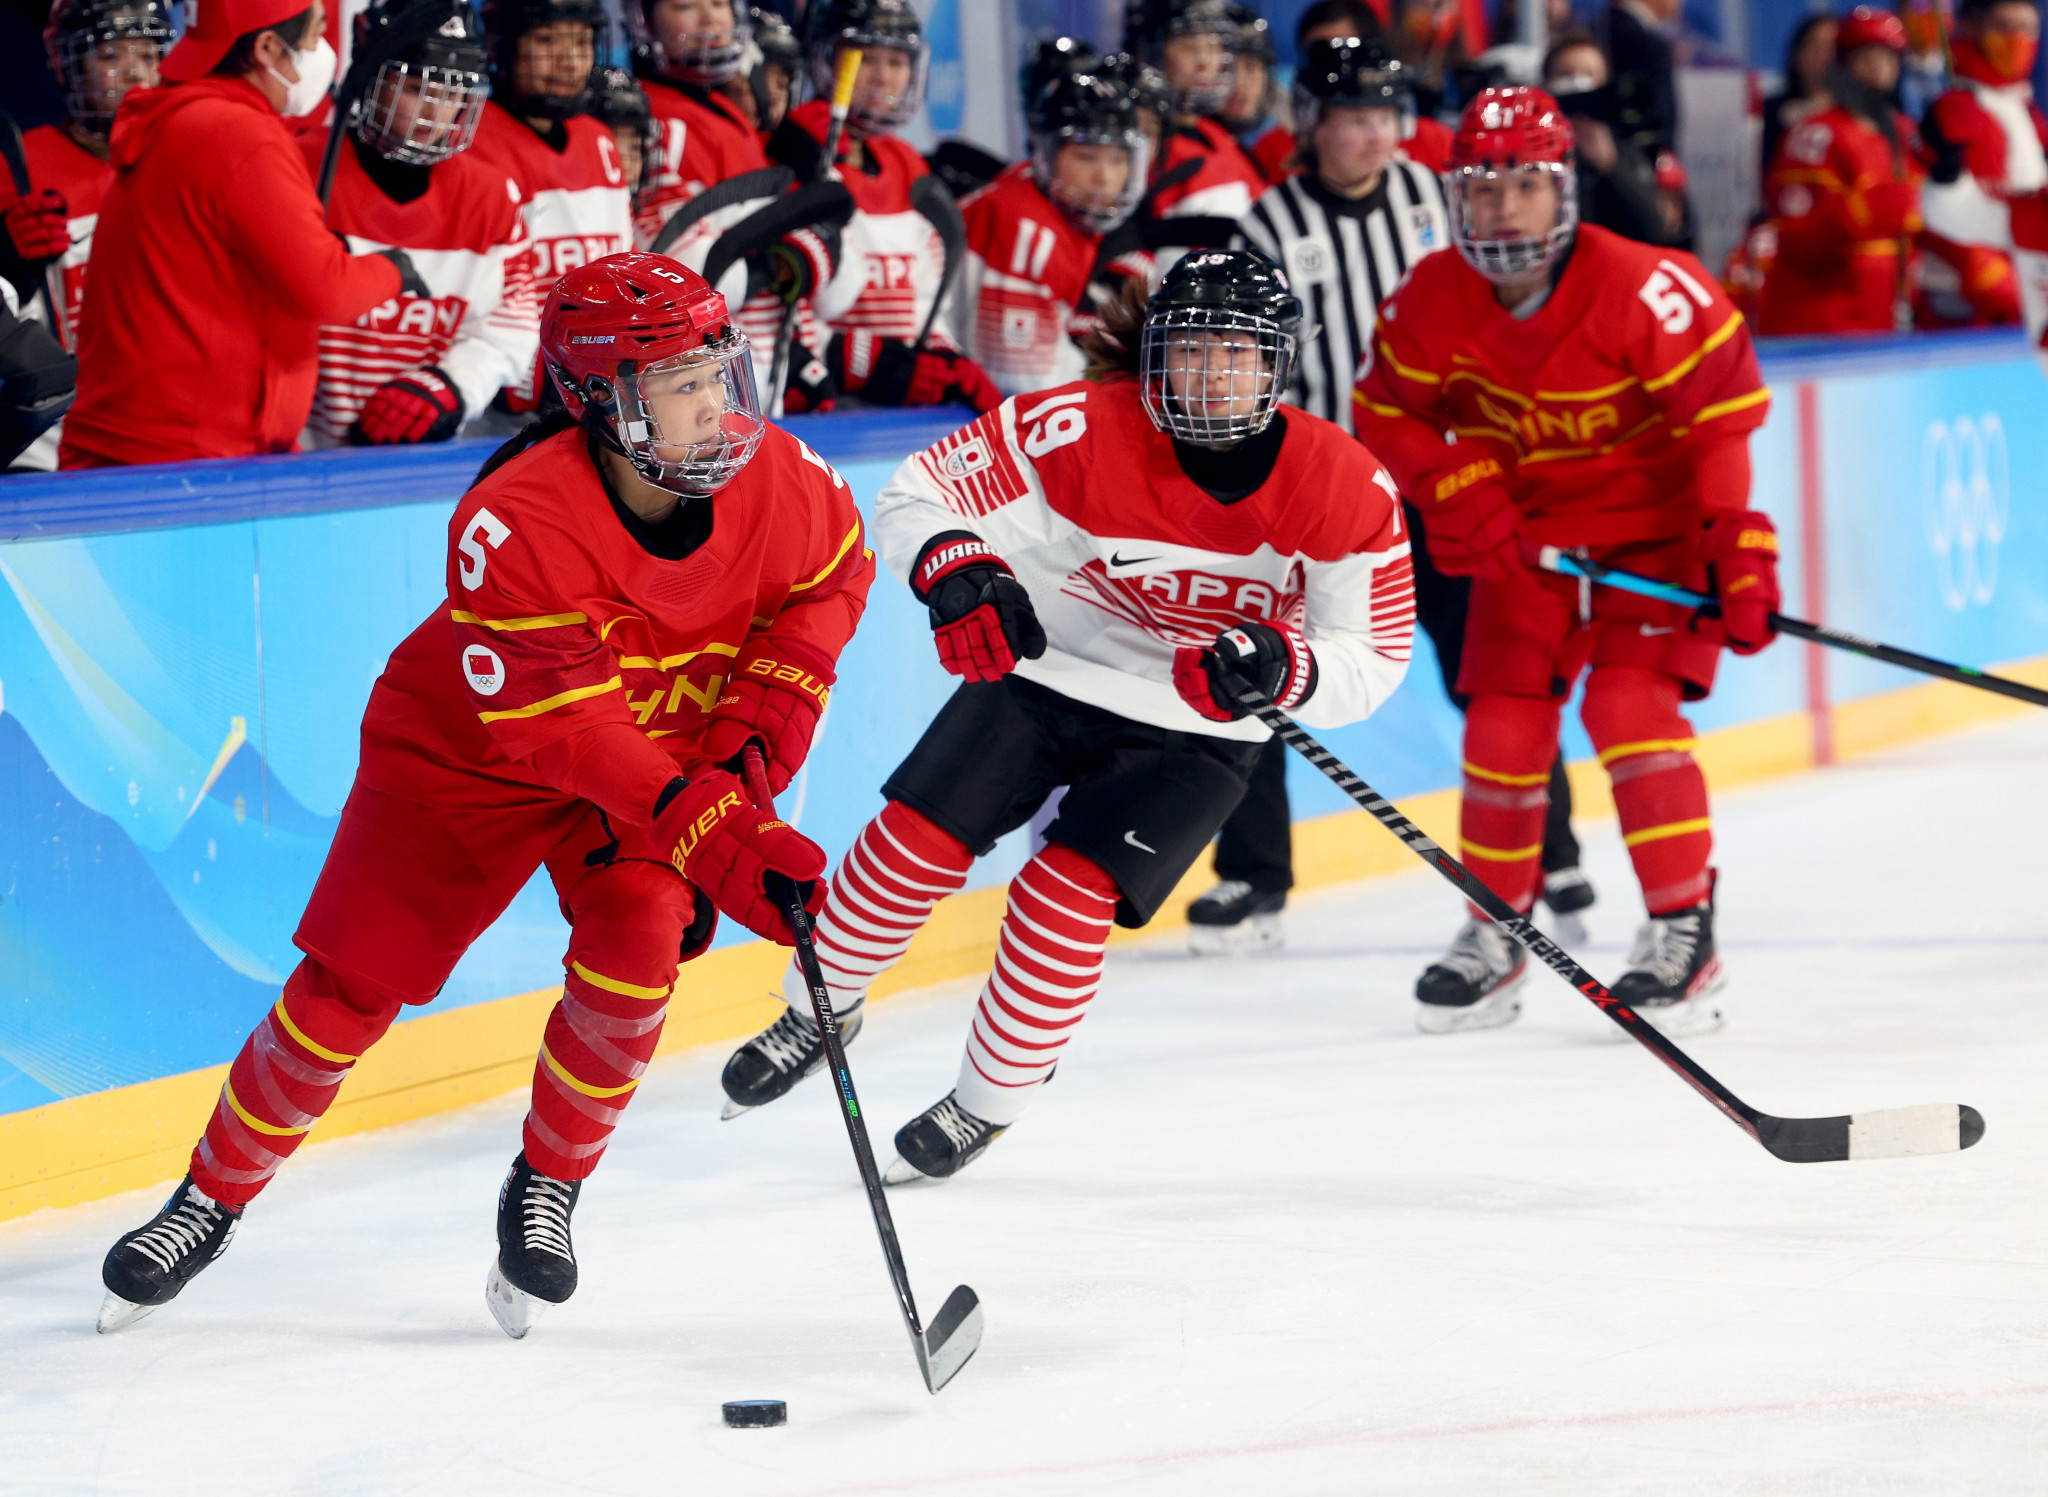 IIHF postpones major event in China due to COVID-19 "complications"